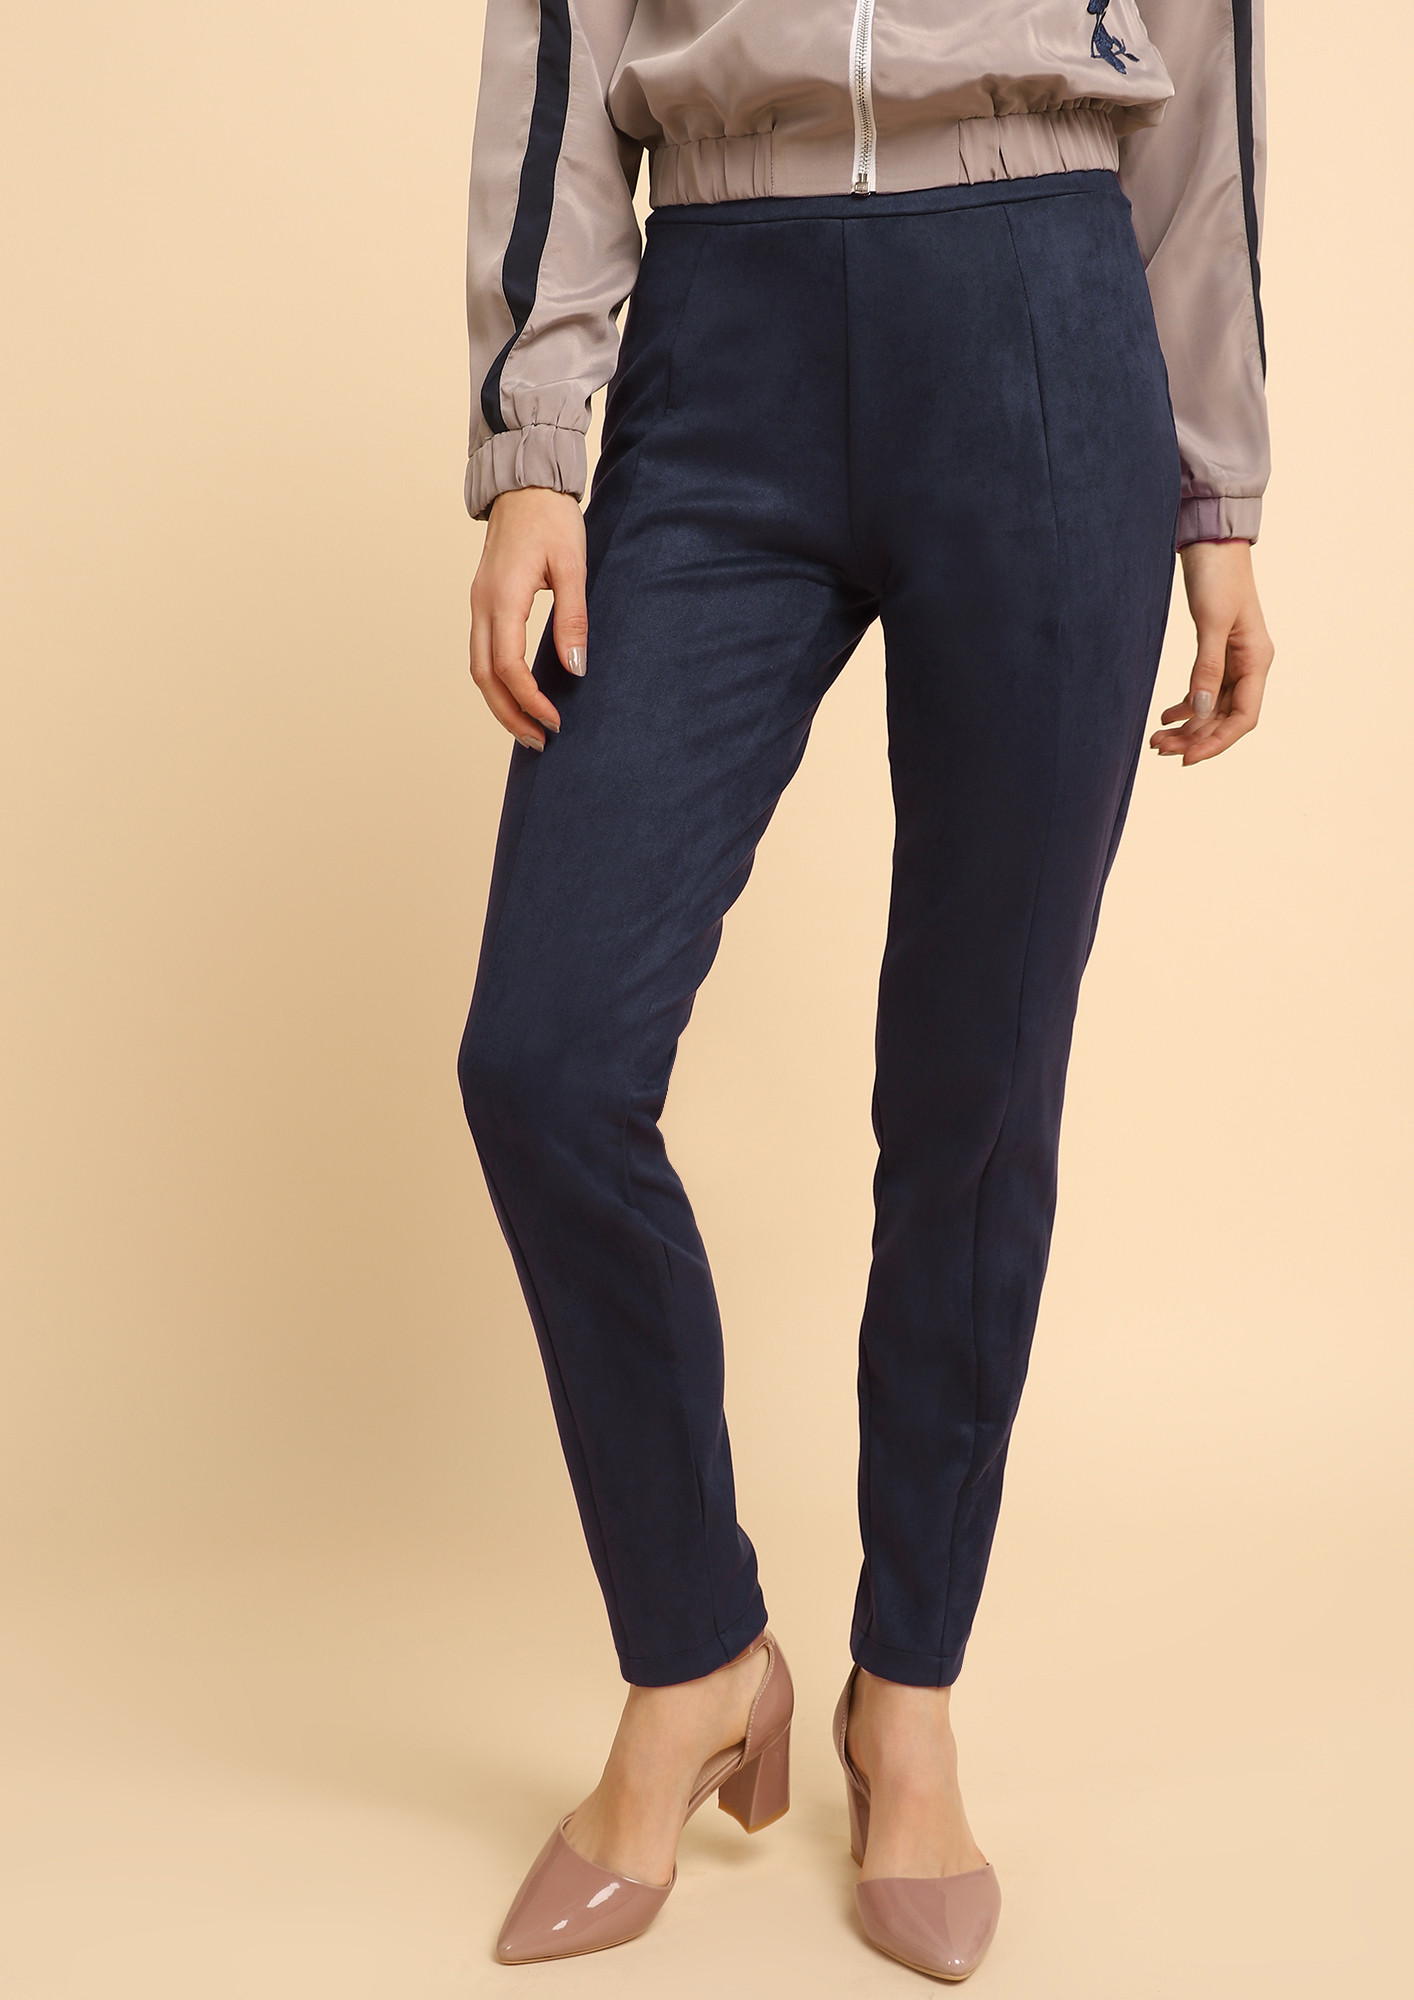 UNFINISHED BUSINESS DARK BLUE TROUSERS